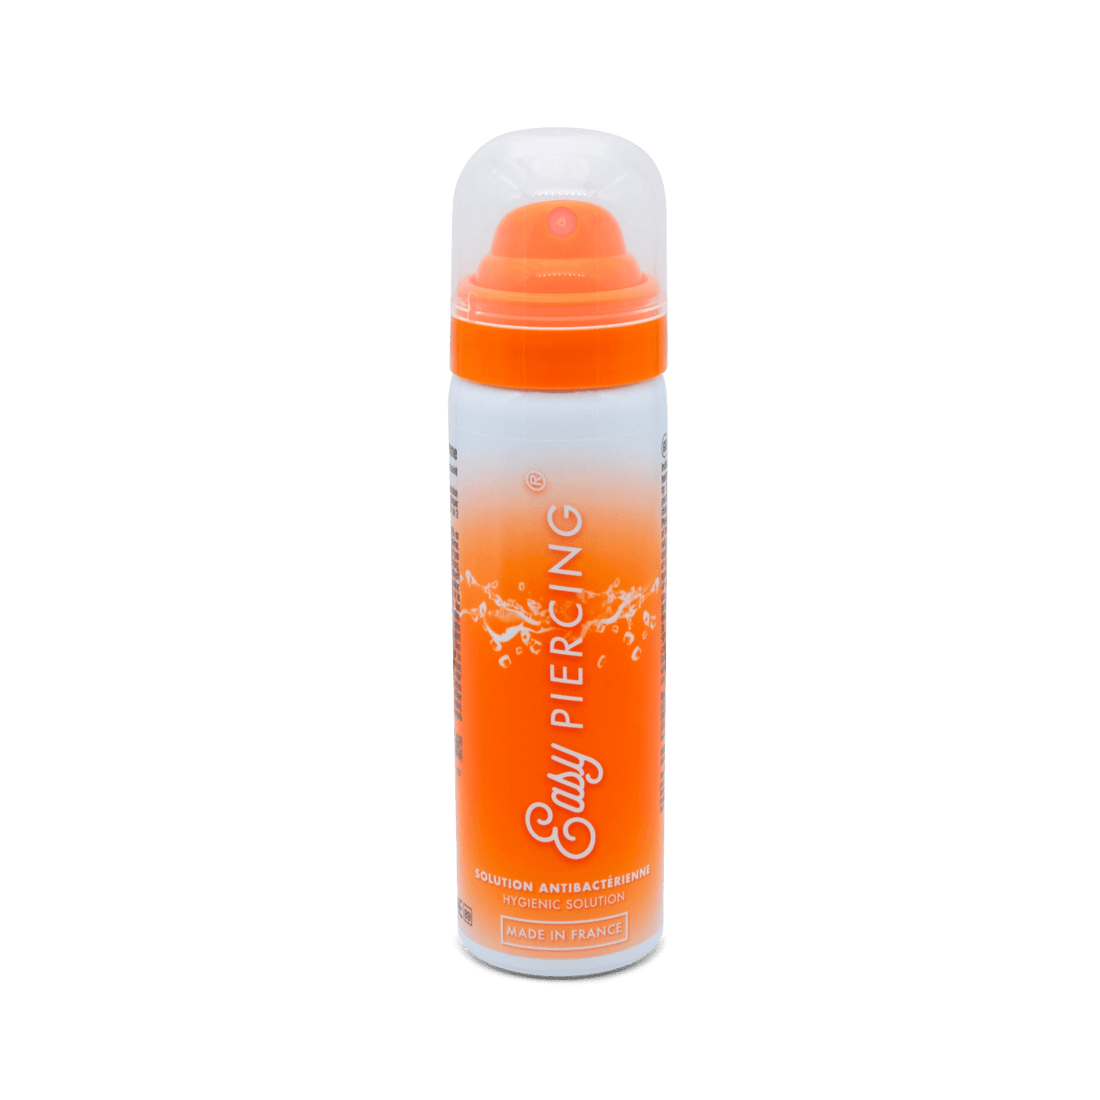 Solution Antibactérienne Spray - 50ml - Scary Needles